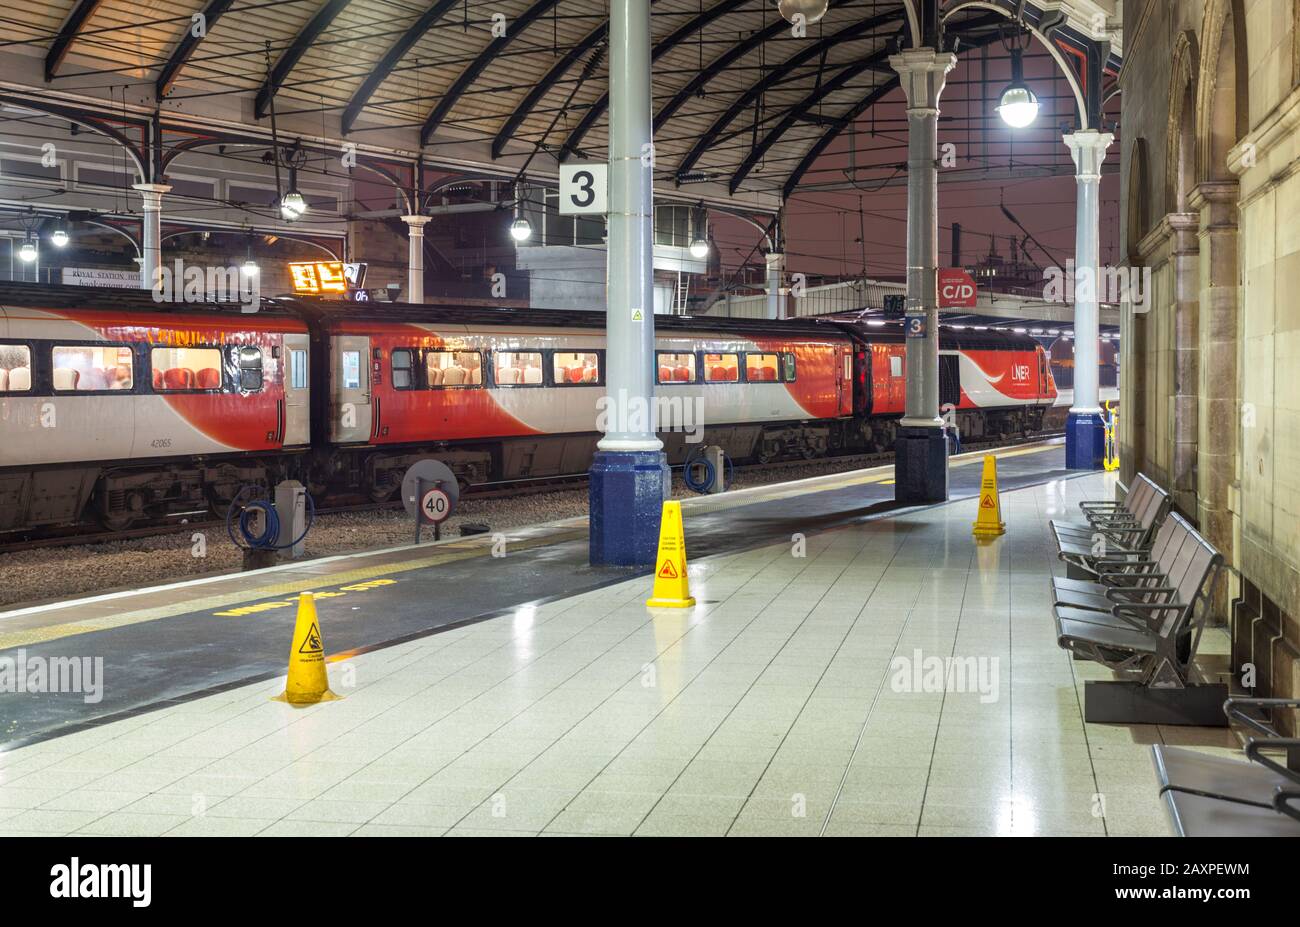 London North eastern railway ( LNER ) high speed train  (Intercity 125 ) at Newcastle central station with power car 43290 leading Stock Photo